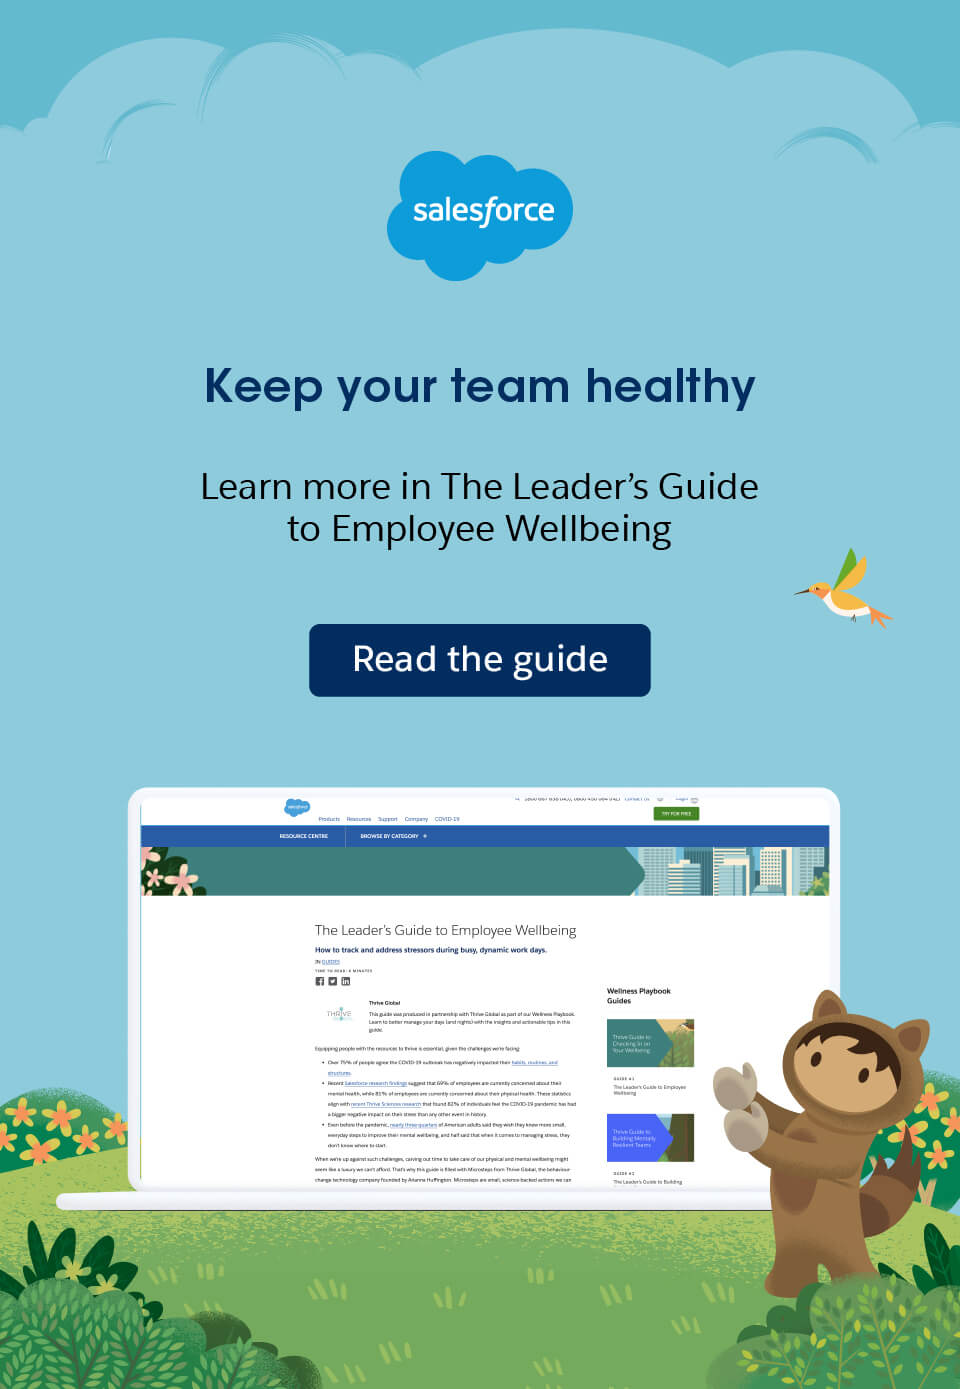 Keep your team healthy. Learn more in The Leader's Guide to Employee Wellbeing.